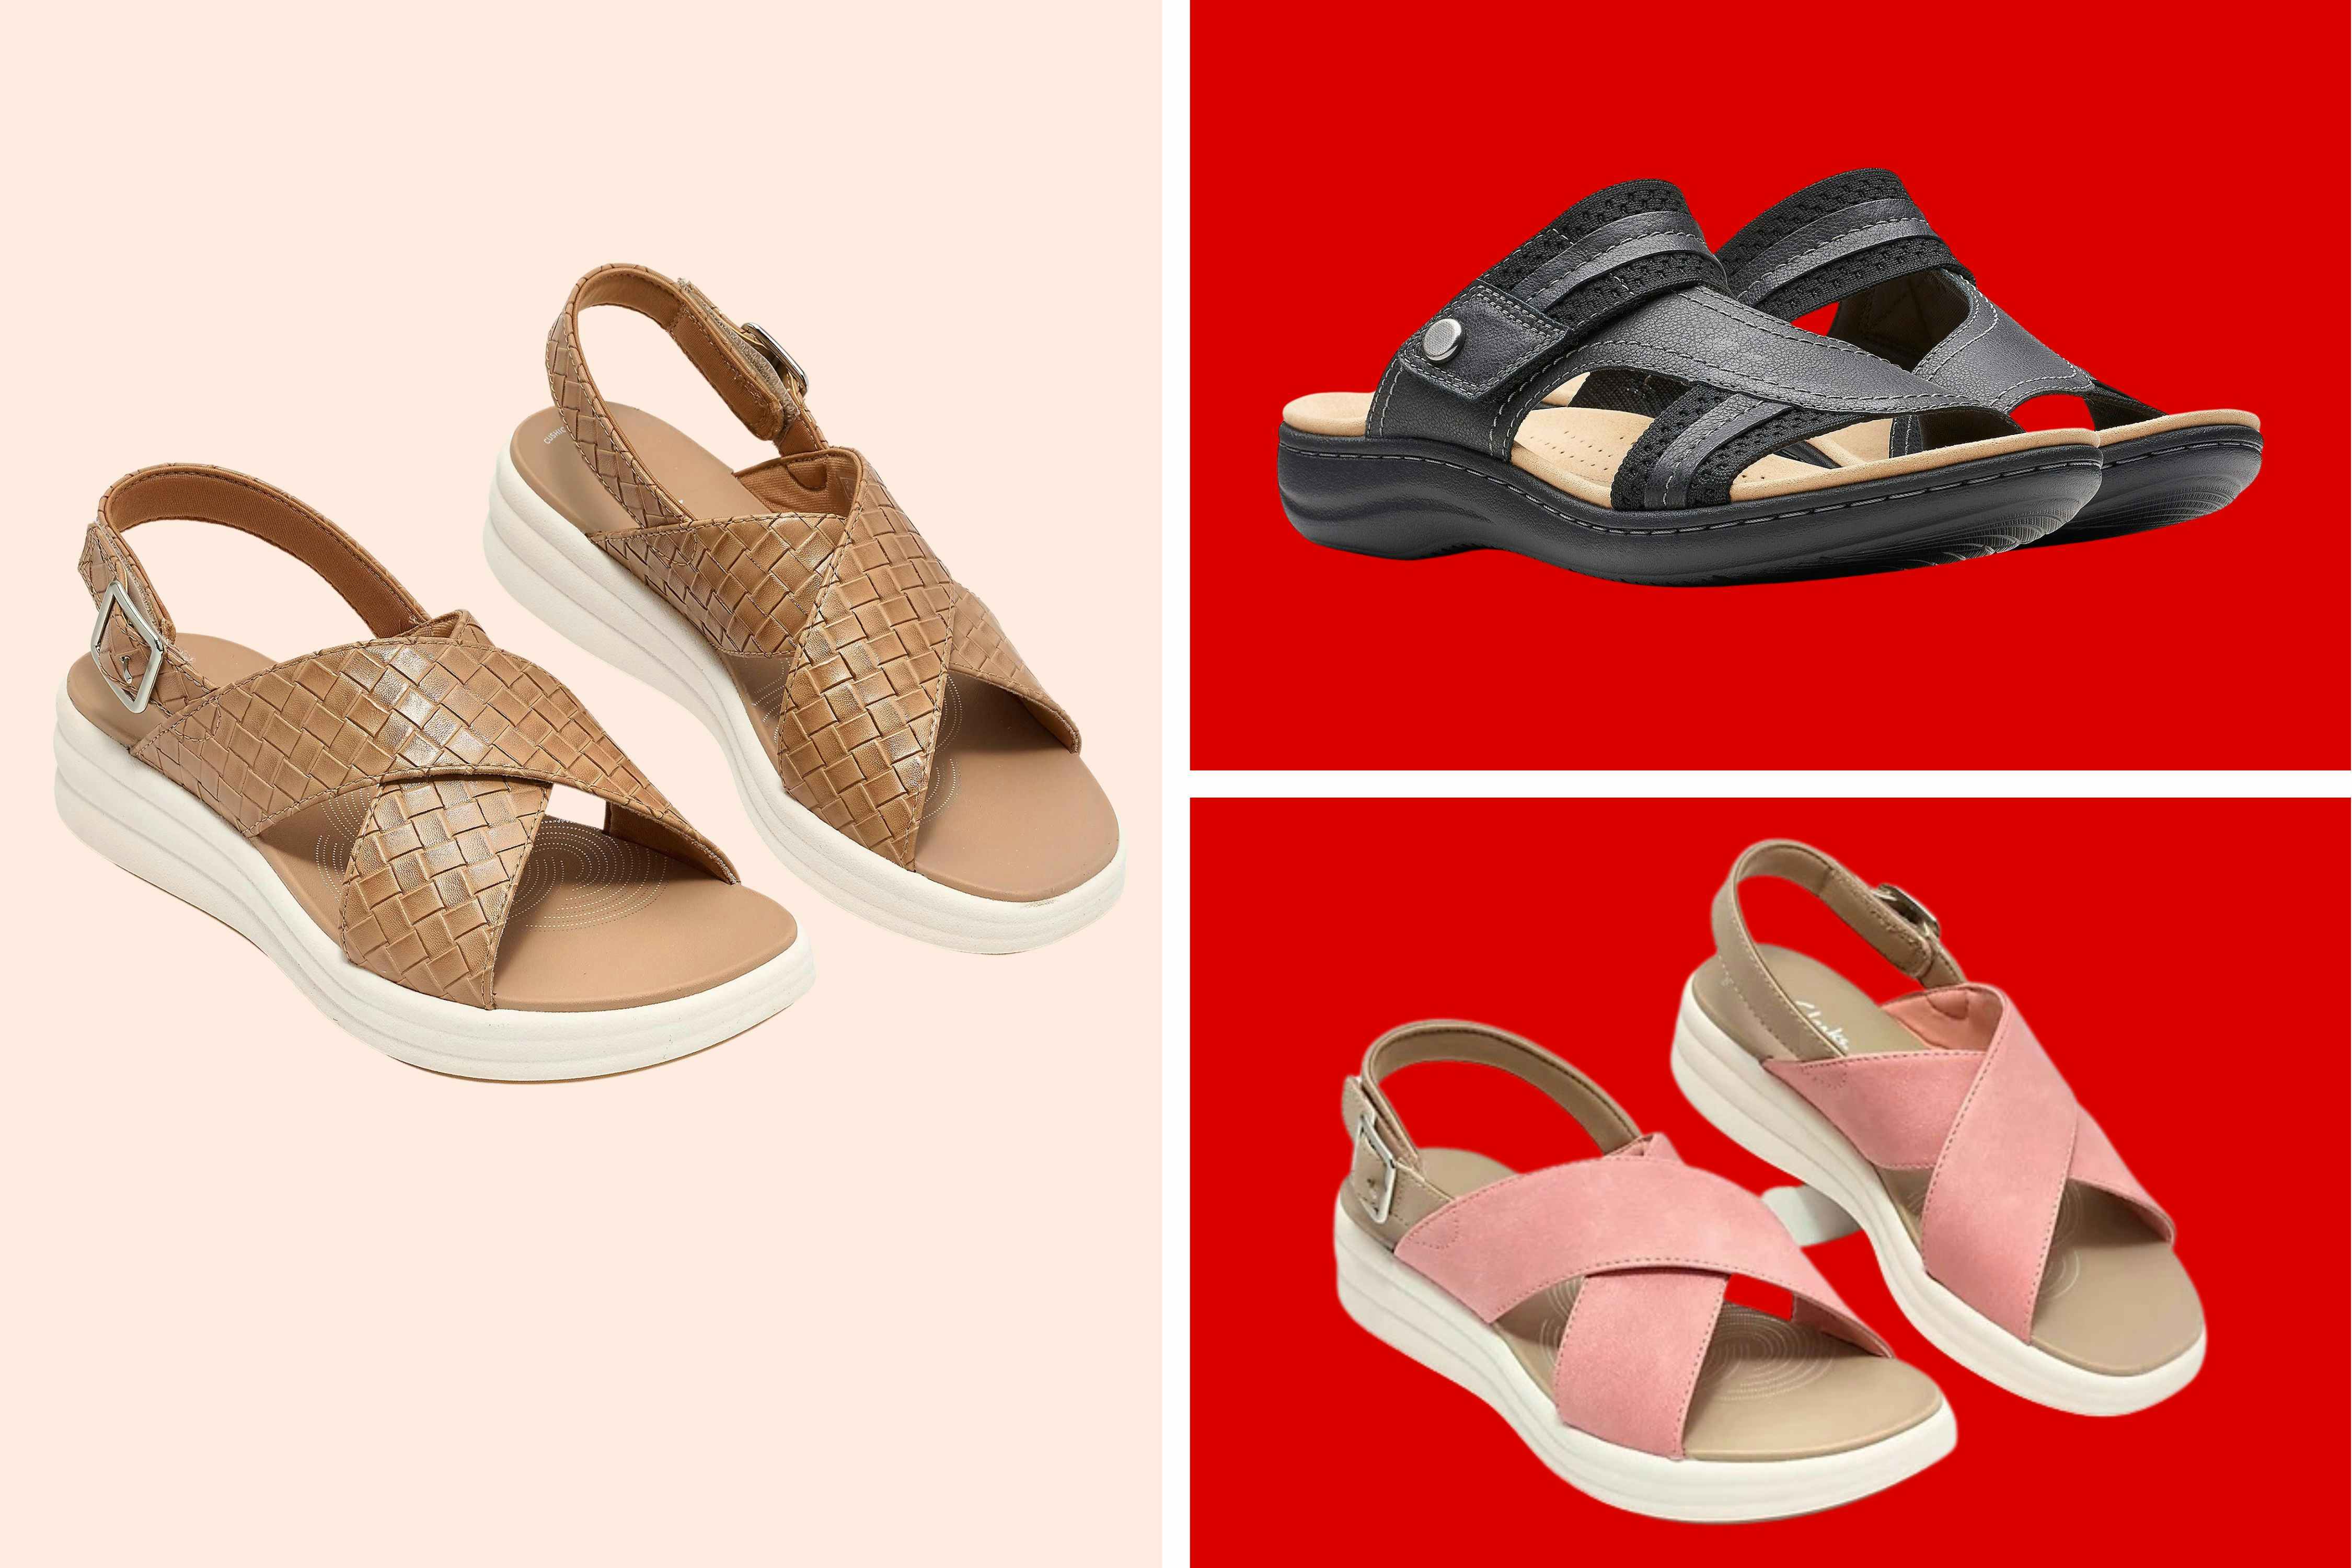 Score Clarks Sandals at QVC — Priced as Low as $35.48 Shipped